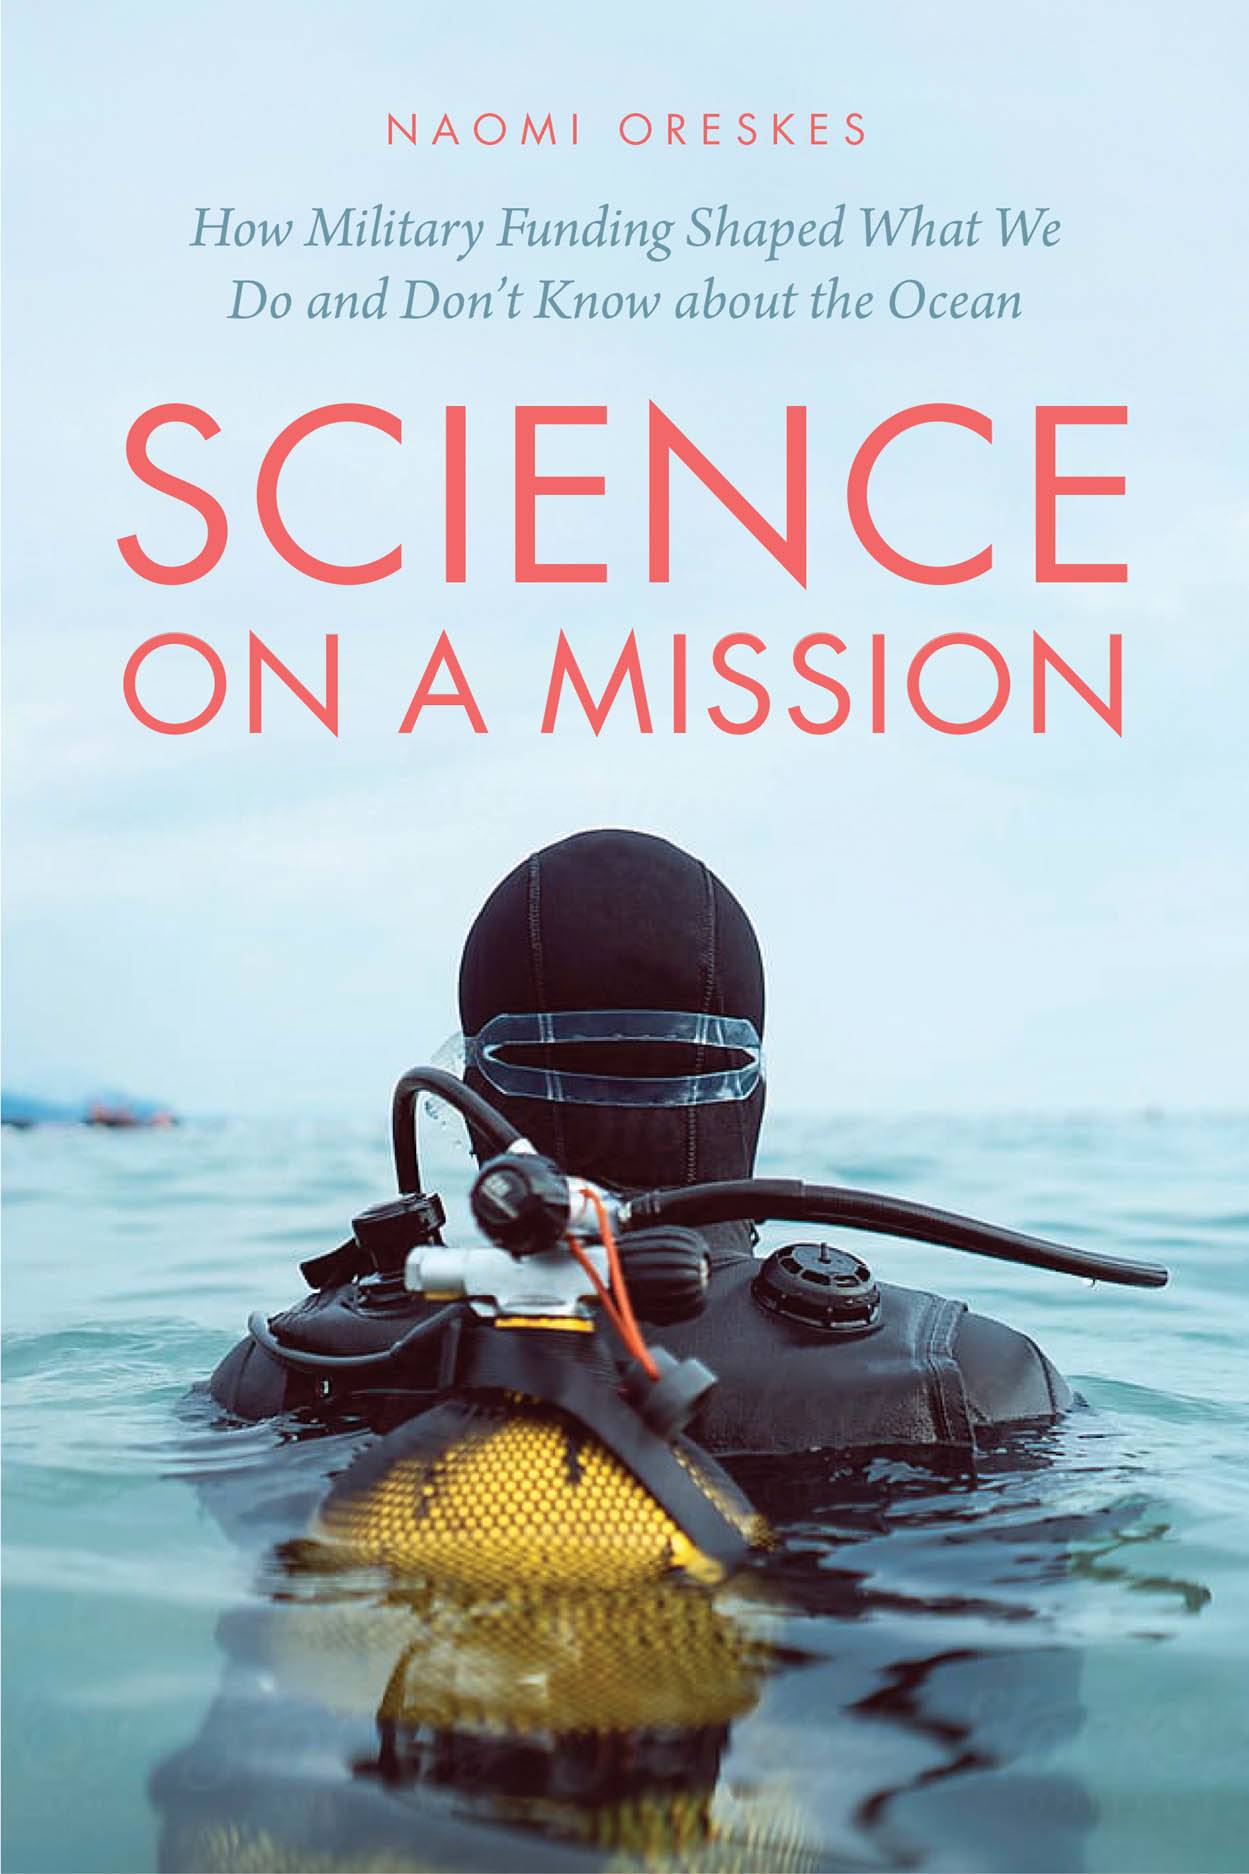 Science on a Mission: How Military Funding Shaped What We Do and Don’t Know about the Ocean